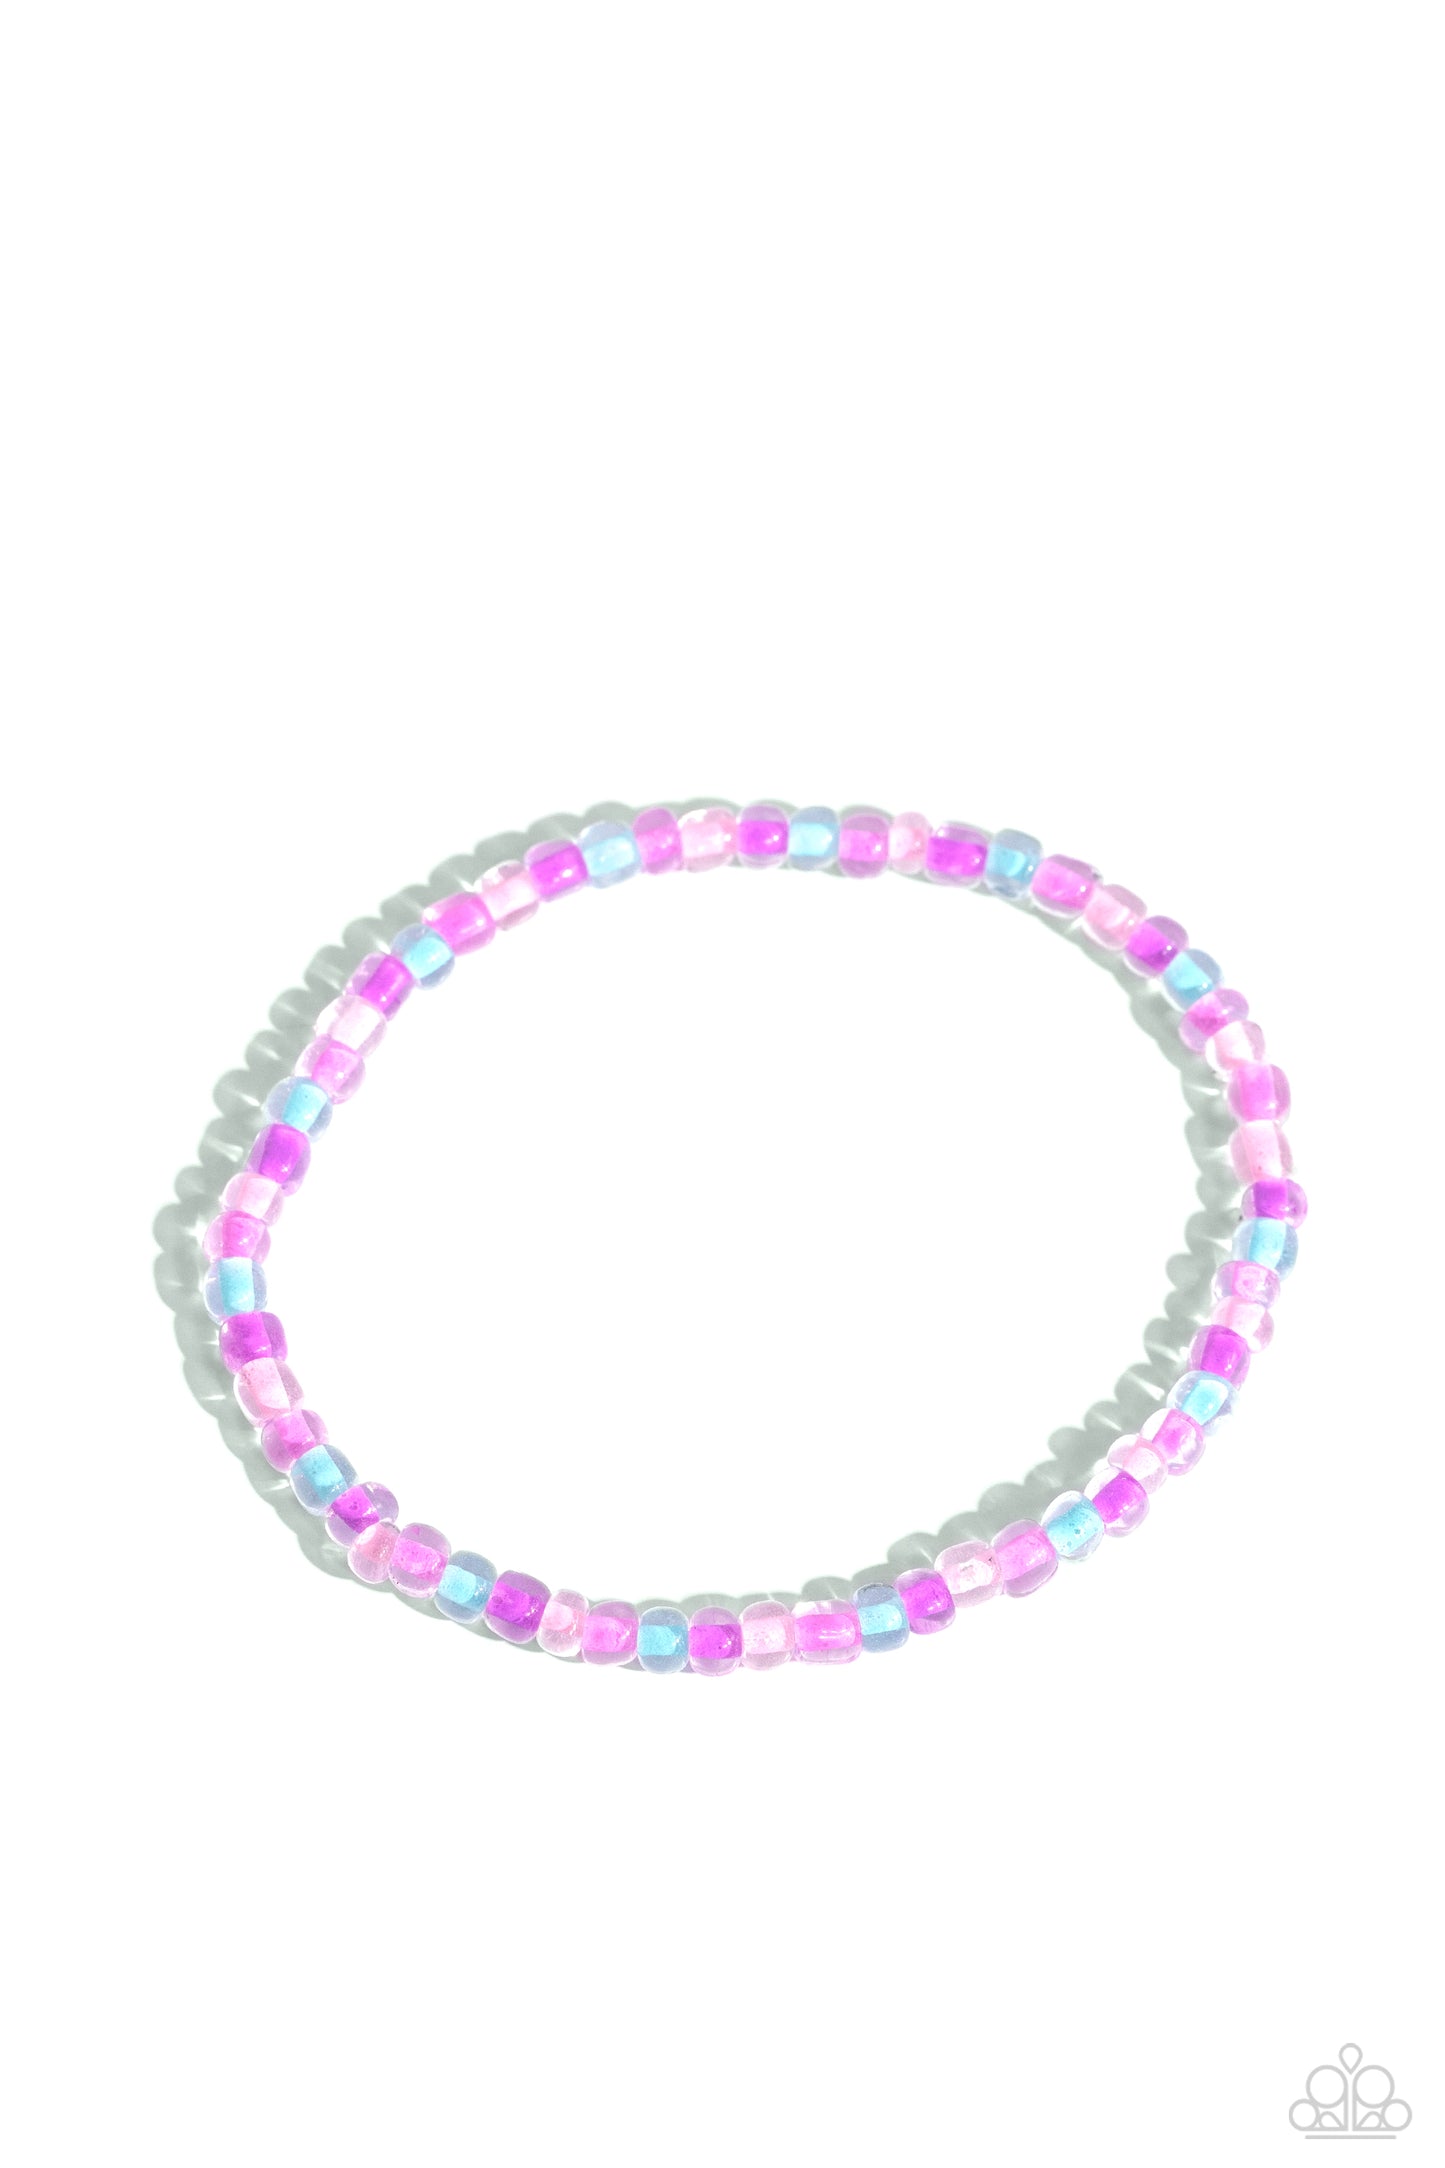 Paparazzi Bracelets - GLASS is in Session - Pink